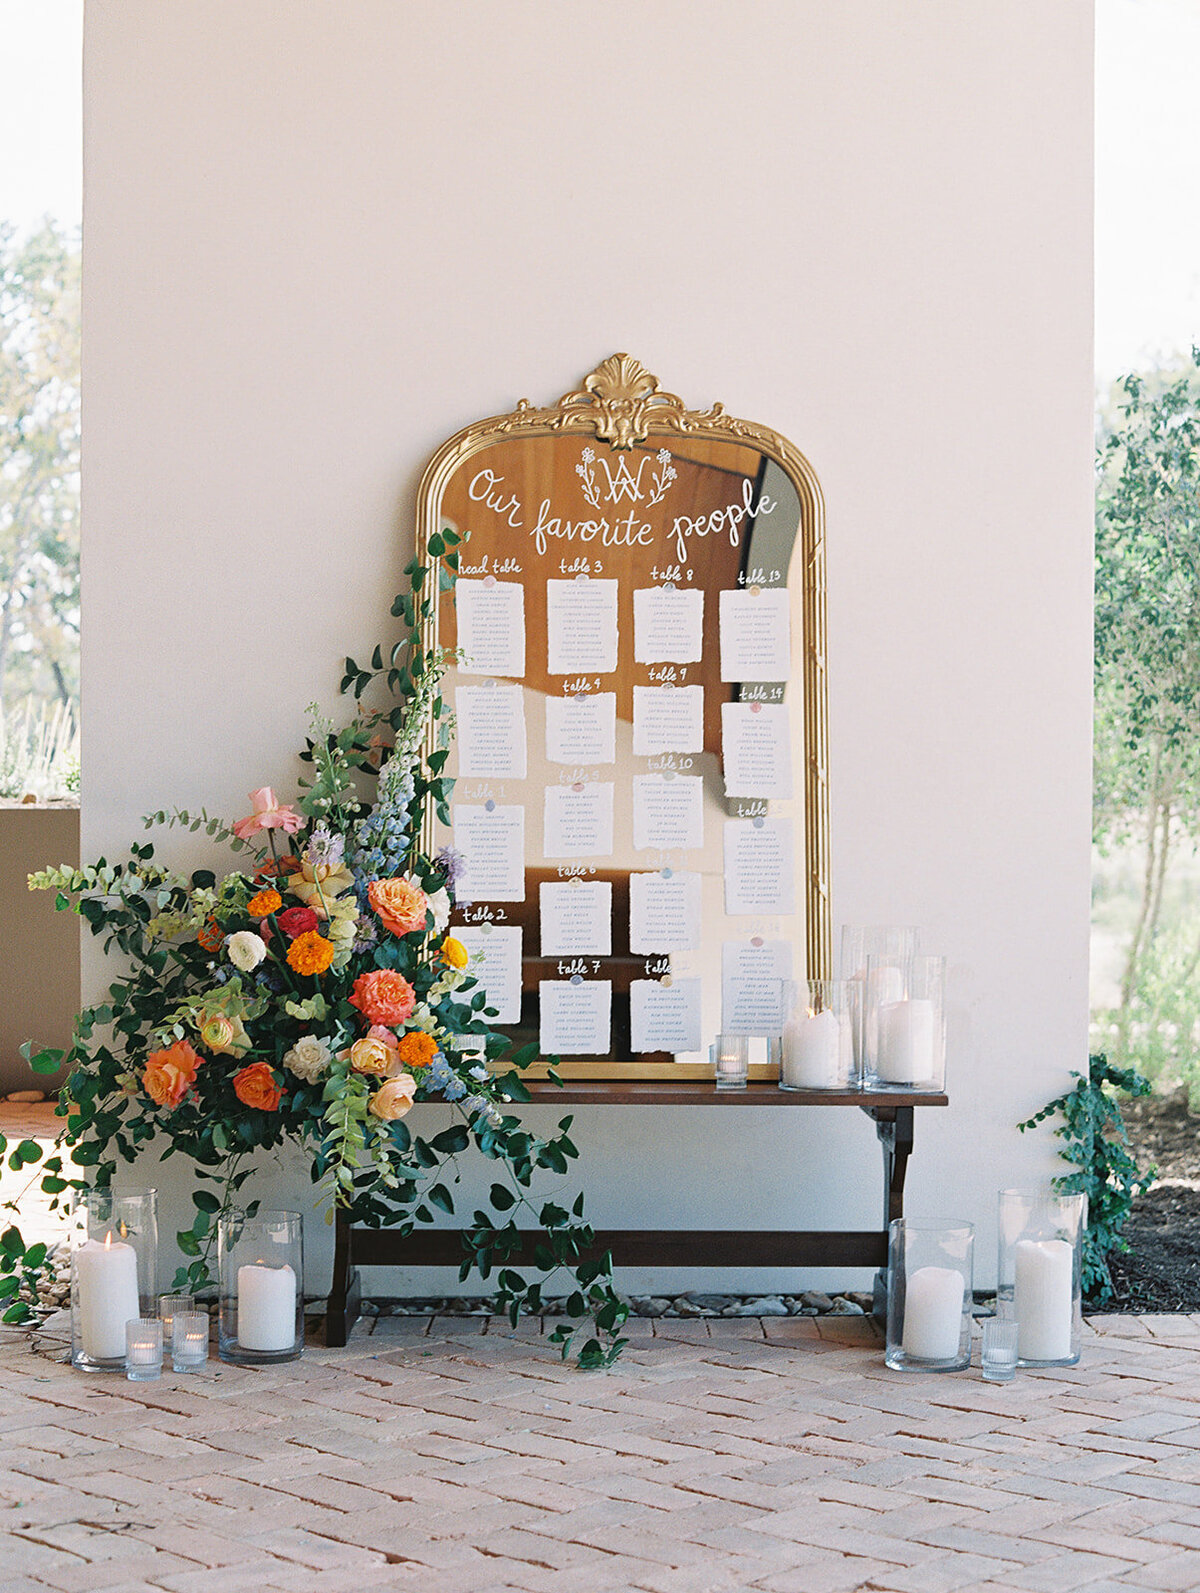 A mirror has been turned into an escort card display as it sits on a bench with flowers